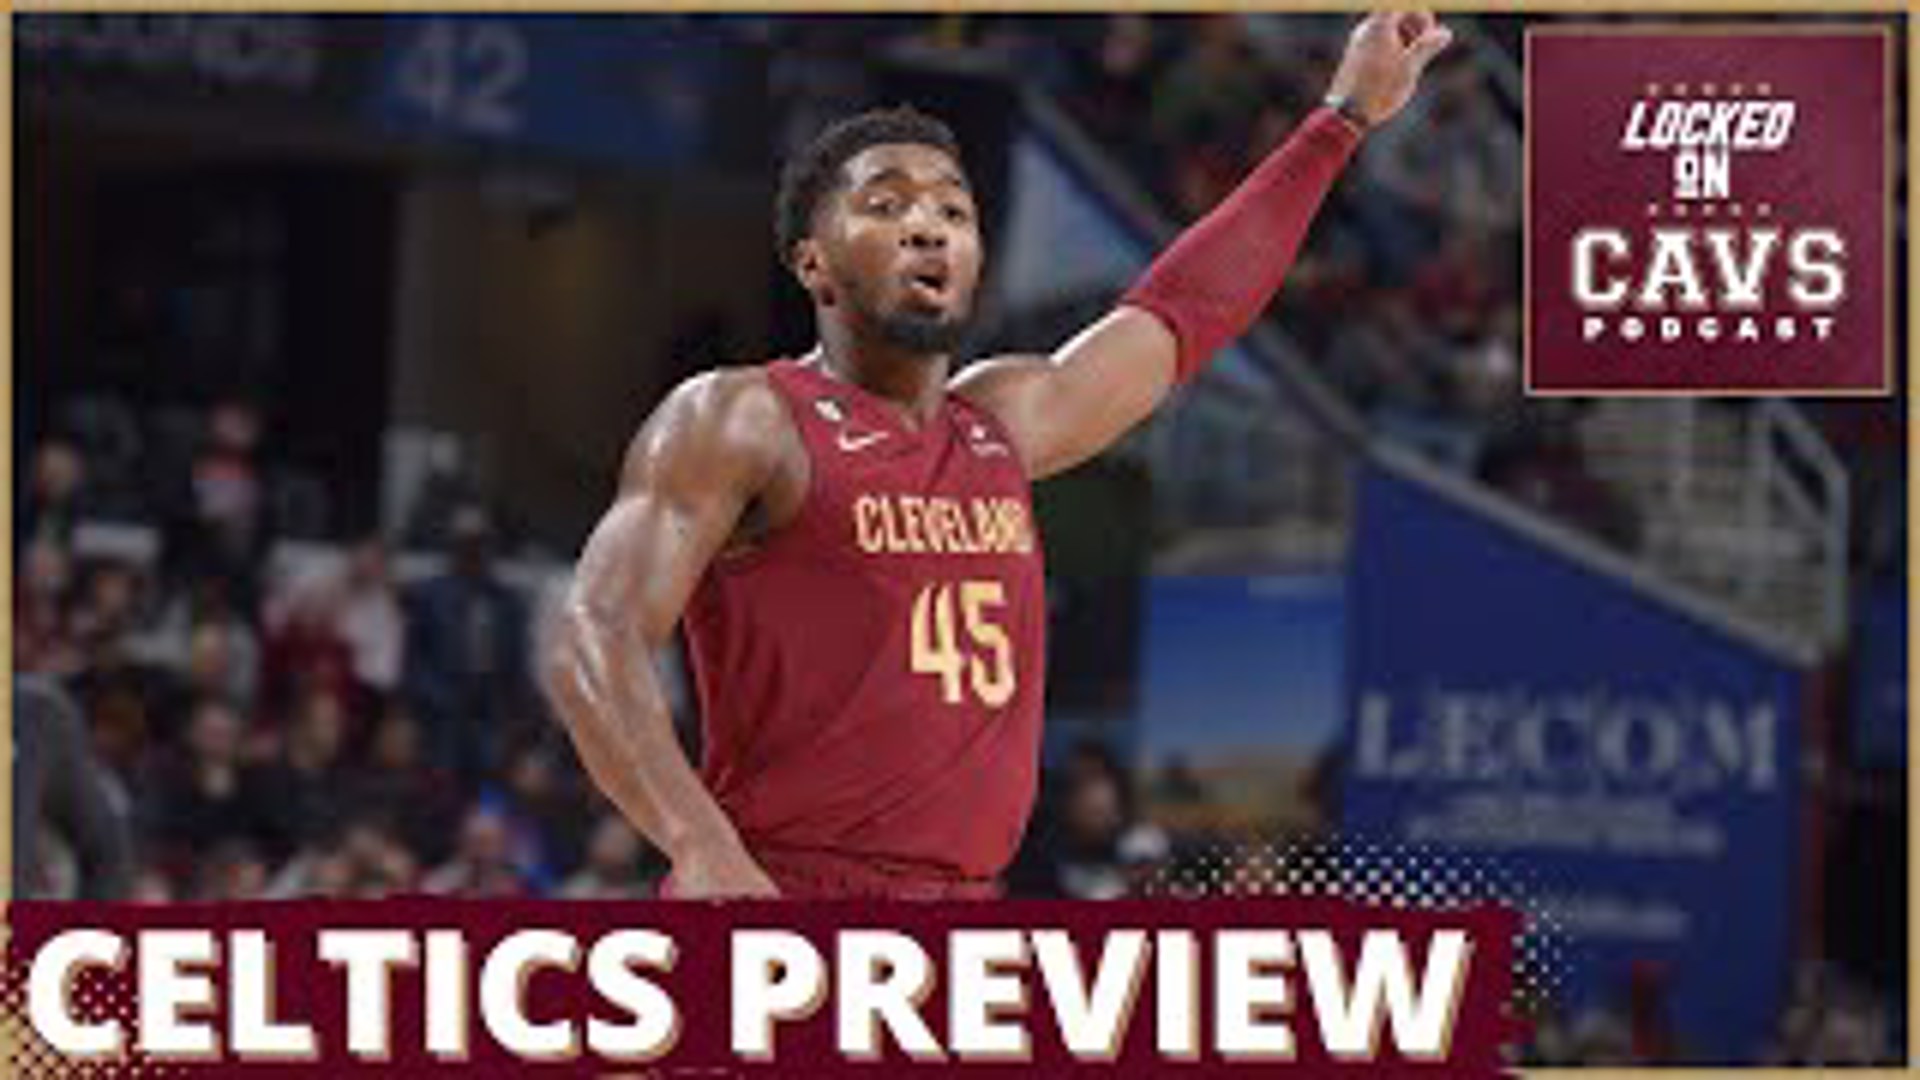 On a new episode of Locked on Cavs, host Chris Manning and Evan Dammarell preview tonight's game against the Boston Celtics.